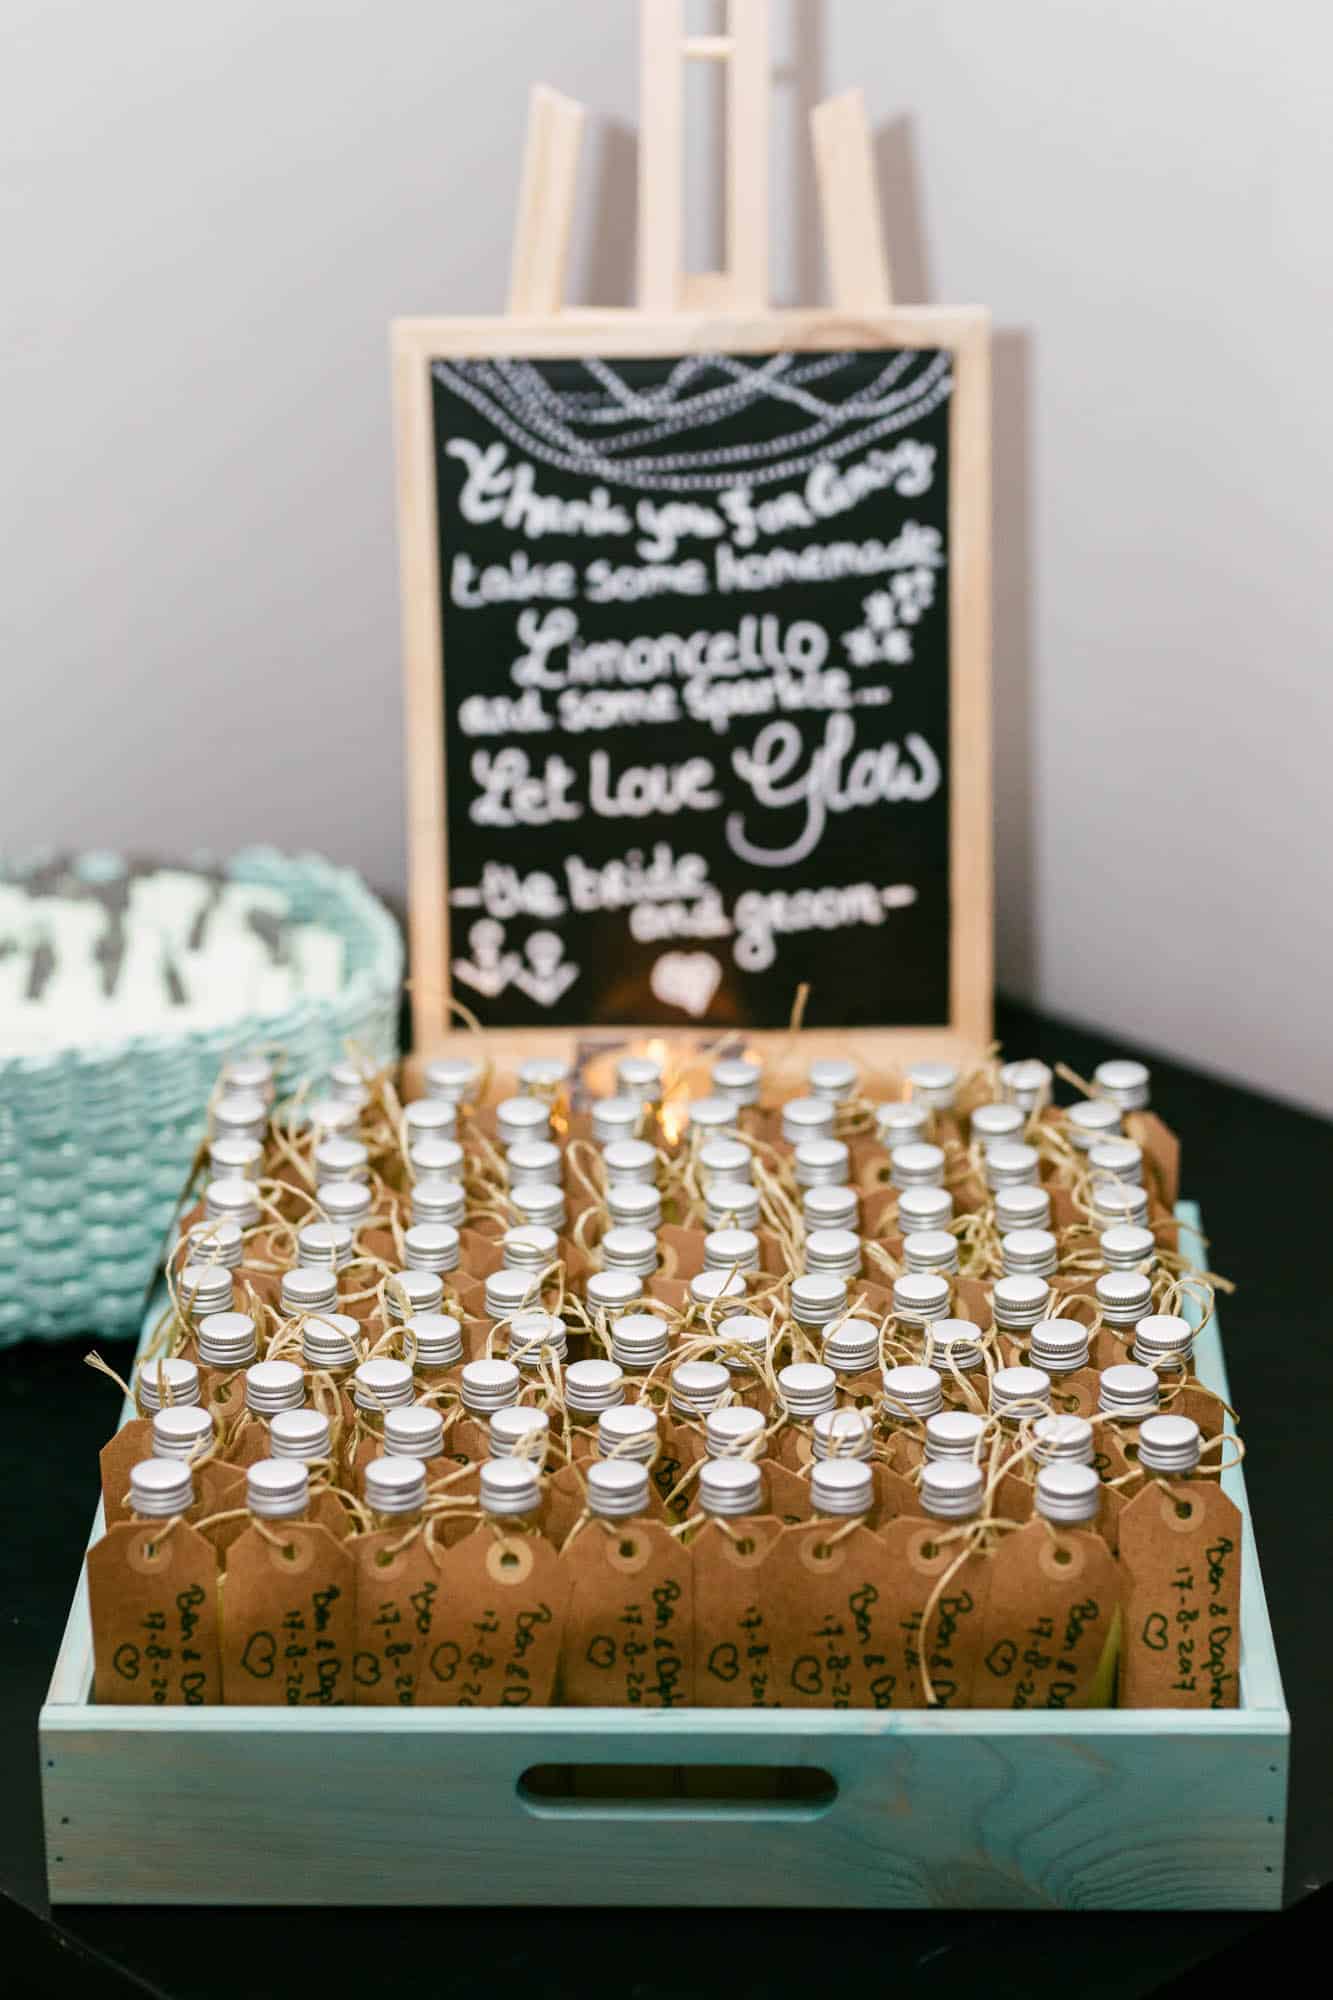 Description: Wedding anniversary gift in bottles with a chalkboard sign.